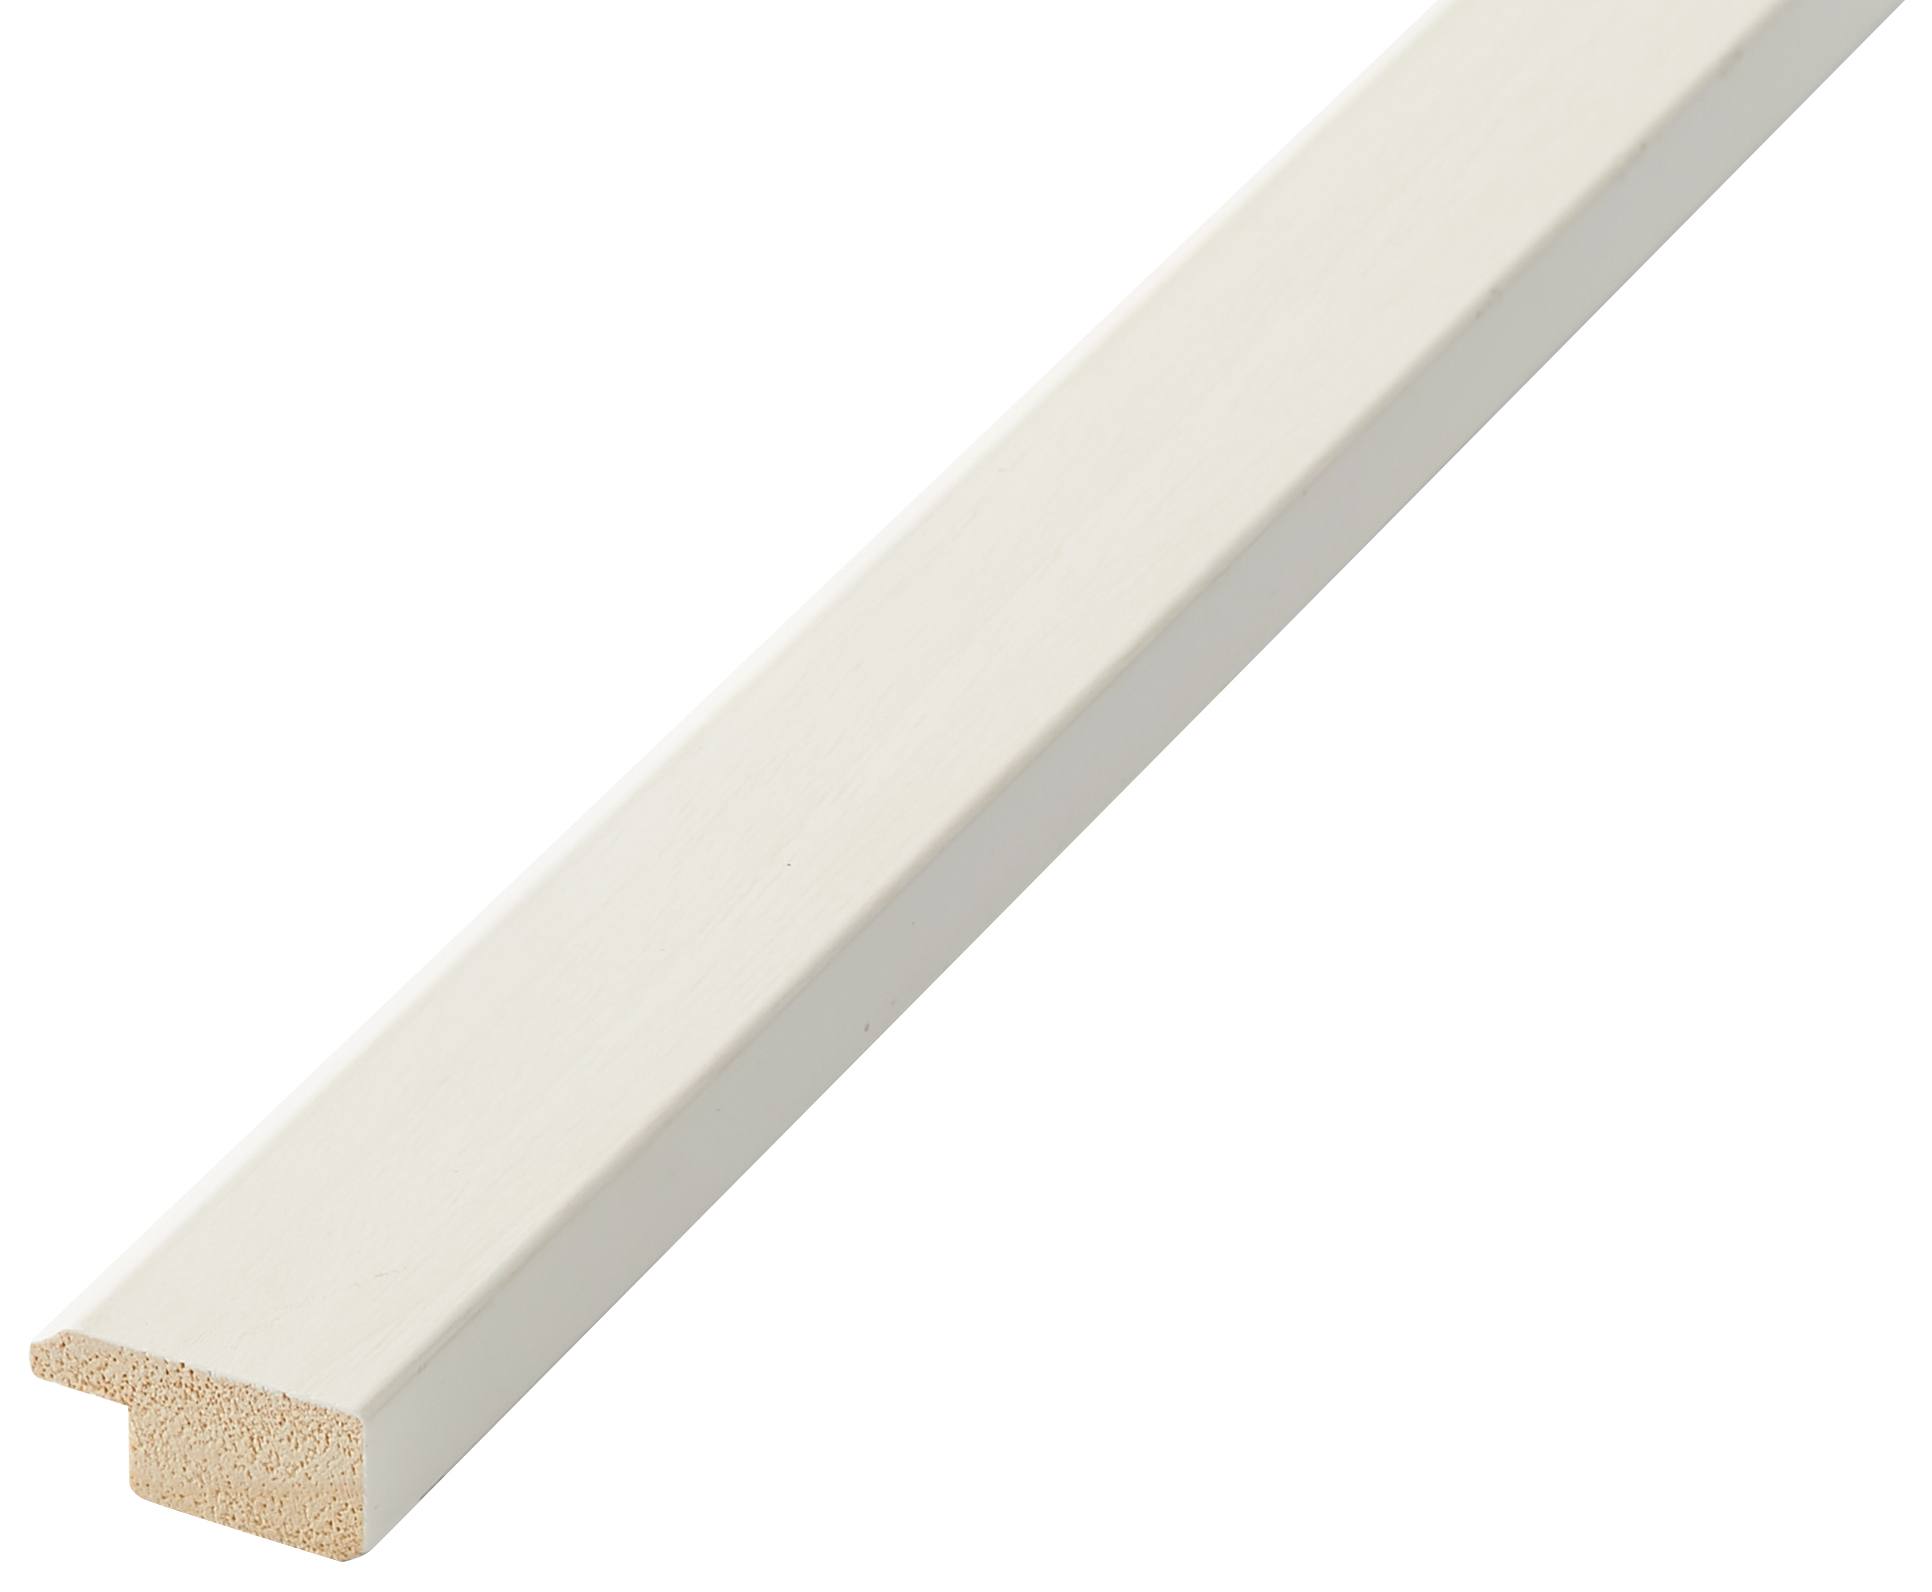 Liner ayous jointed - Width 21mm Height 10 - cream